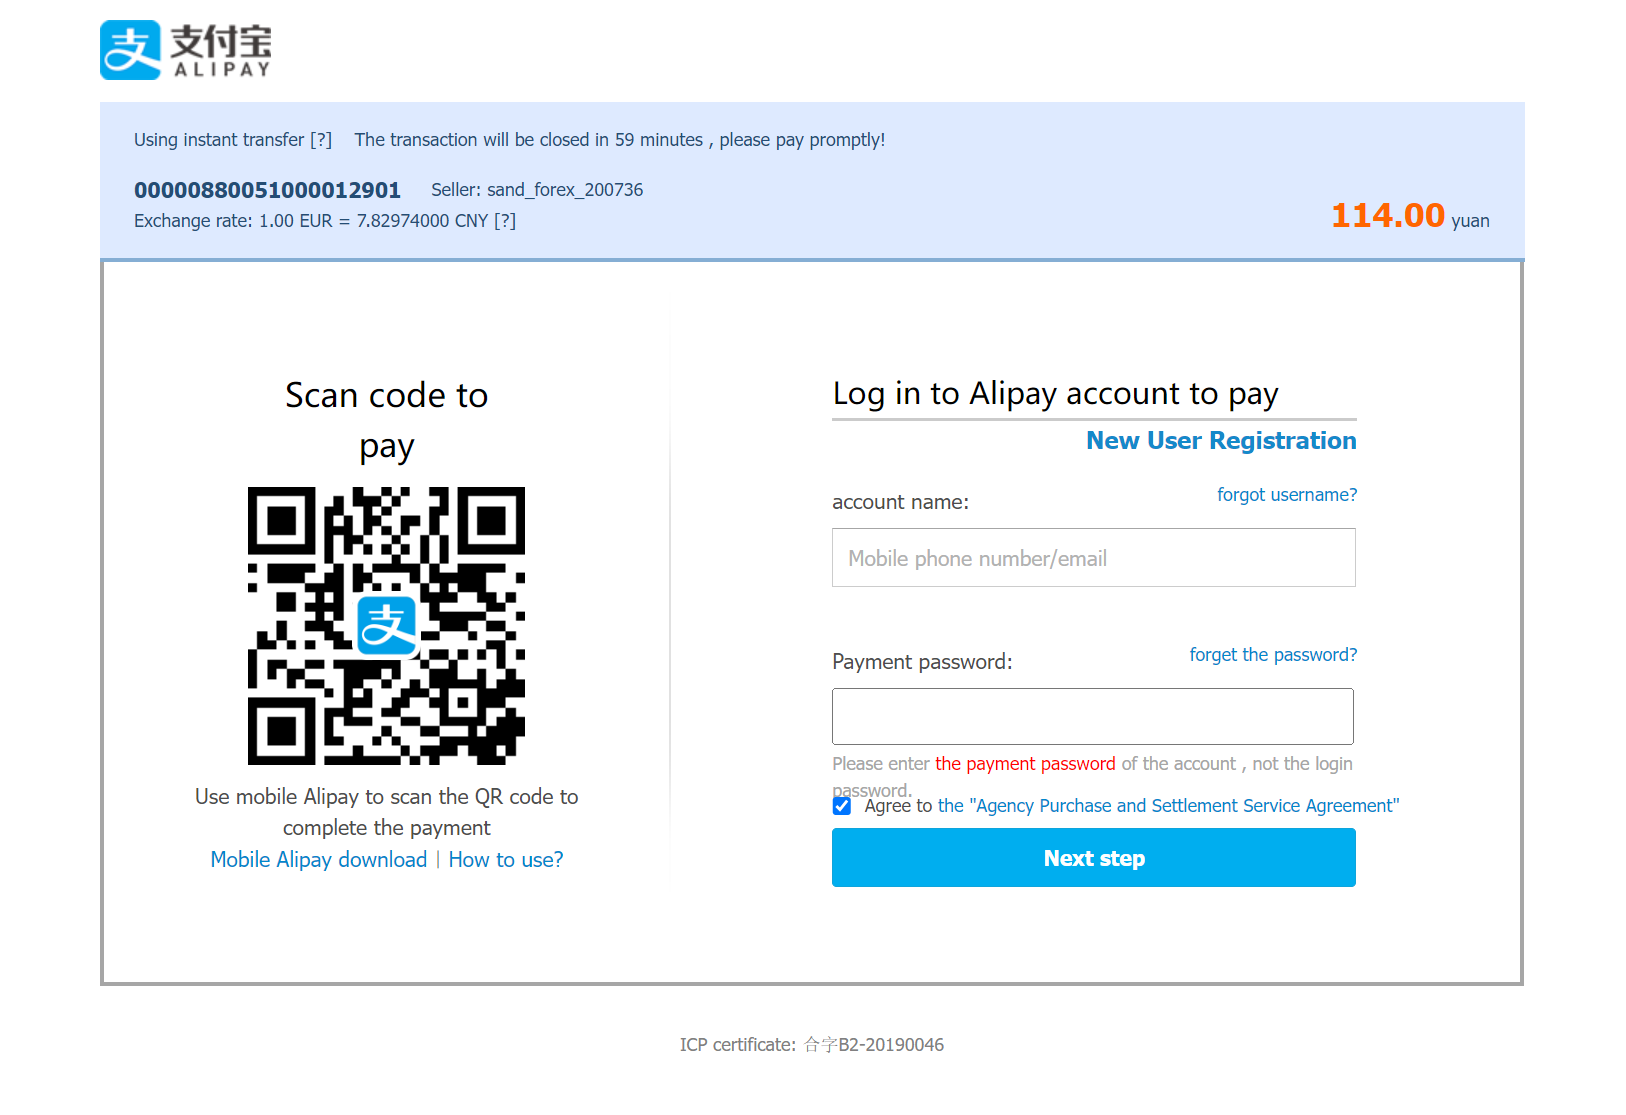 Alipay-consumer-experience-desktop-flow-in-english-login-page